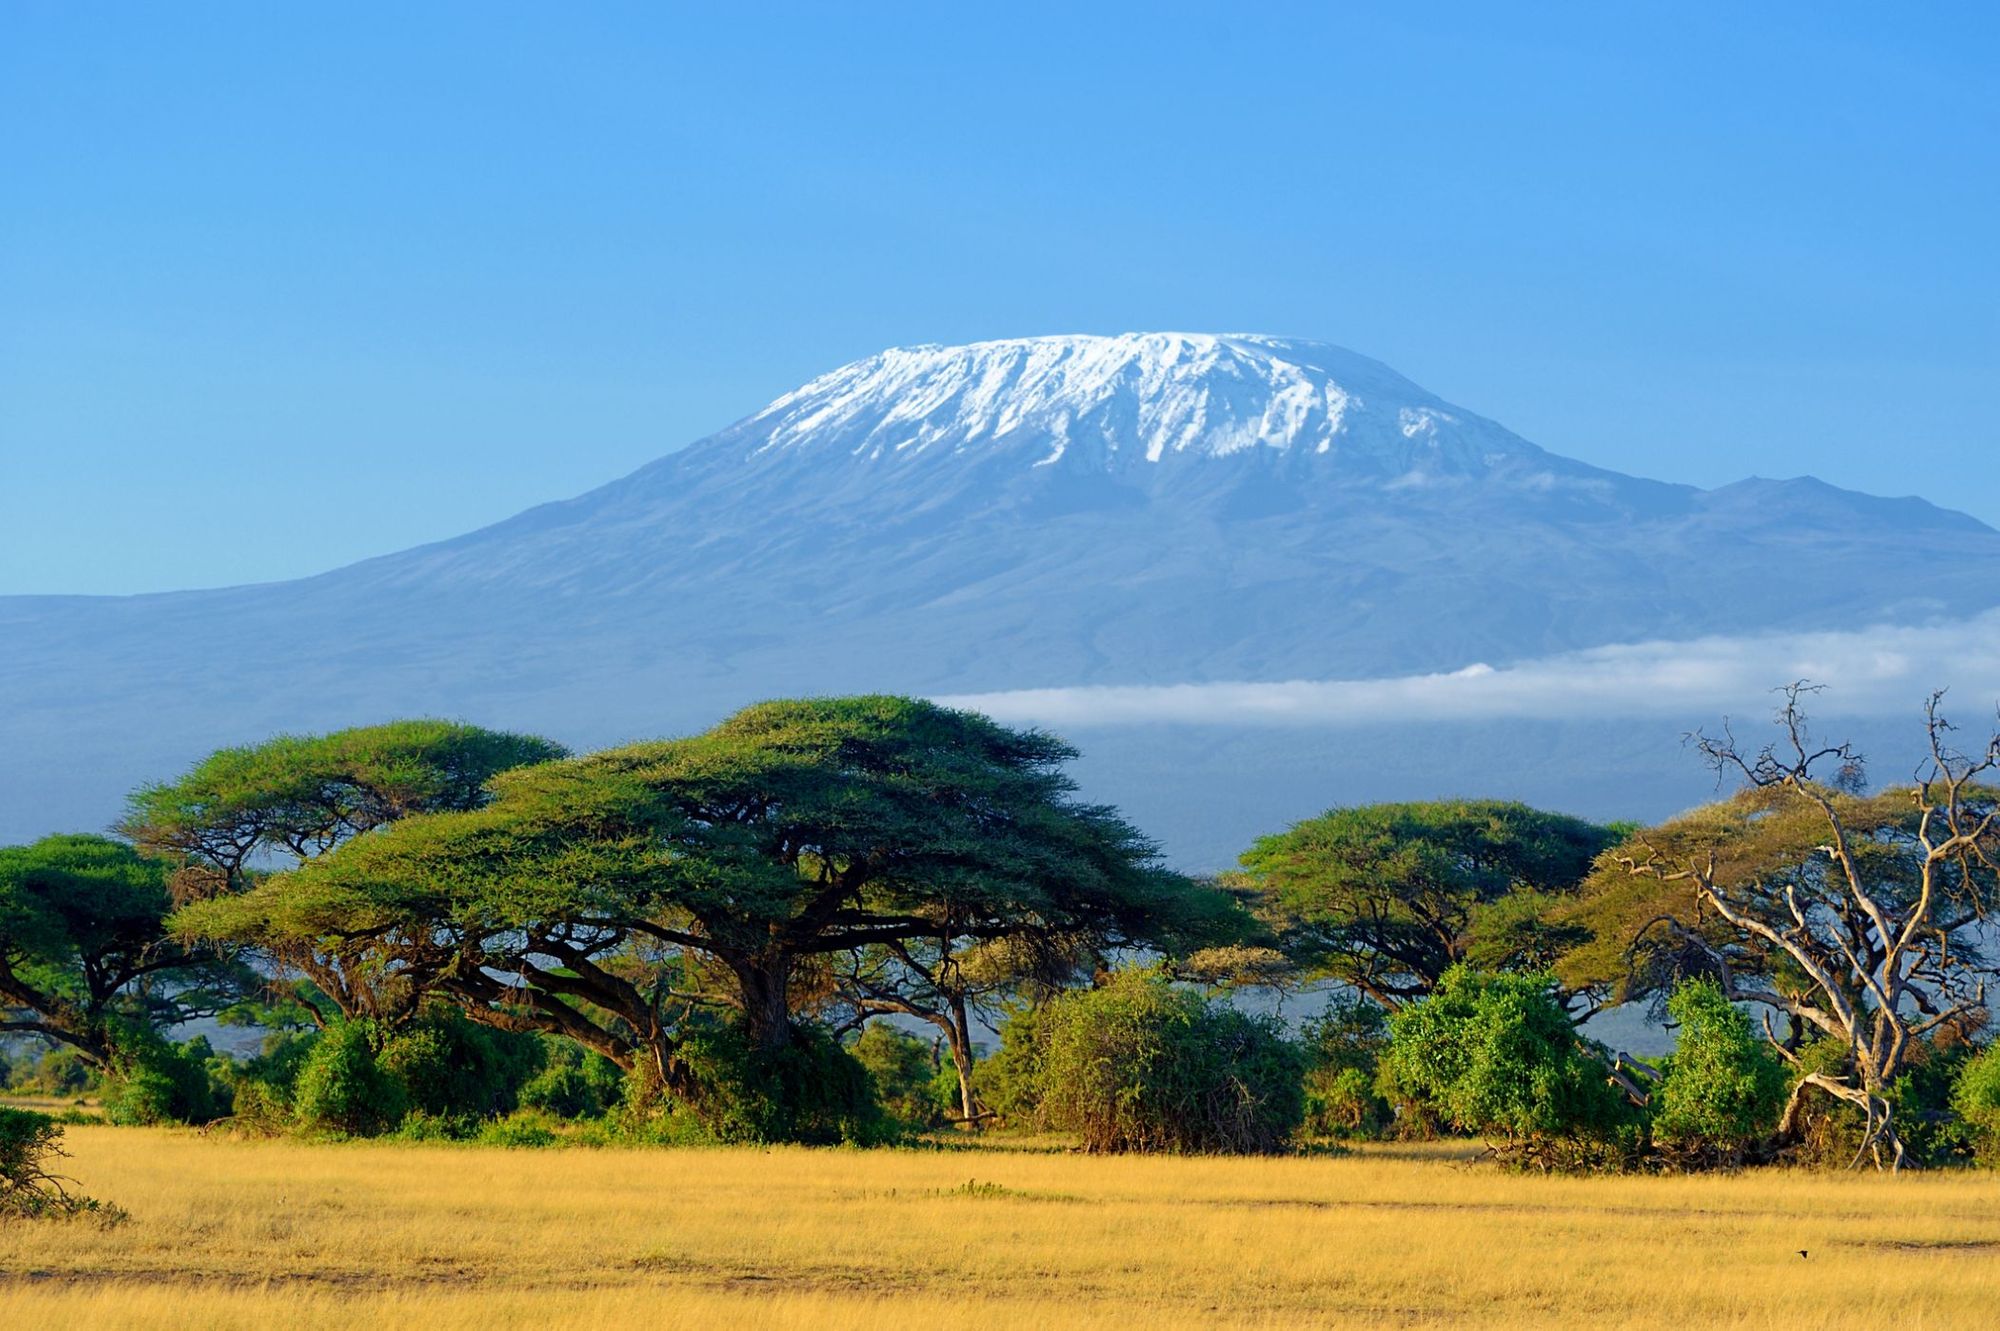 The stunning form of Mount Kilimanjaro, the highest mountain in Africa. Photo: Getty